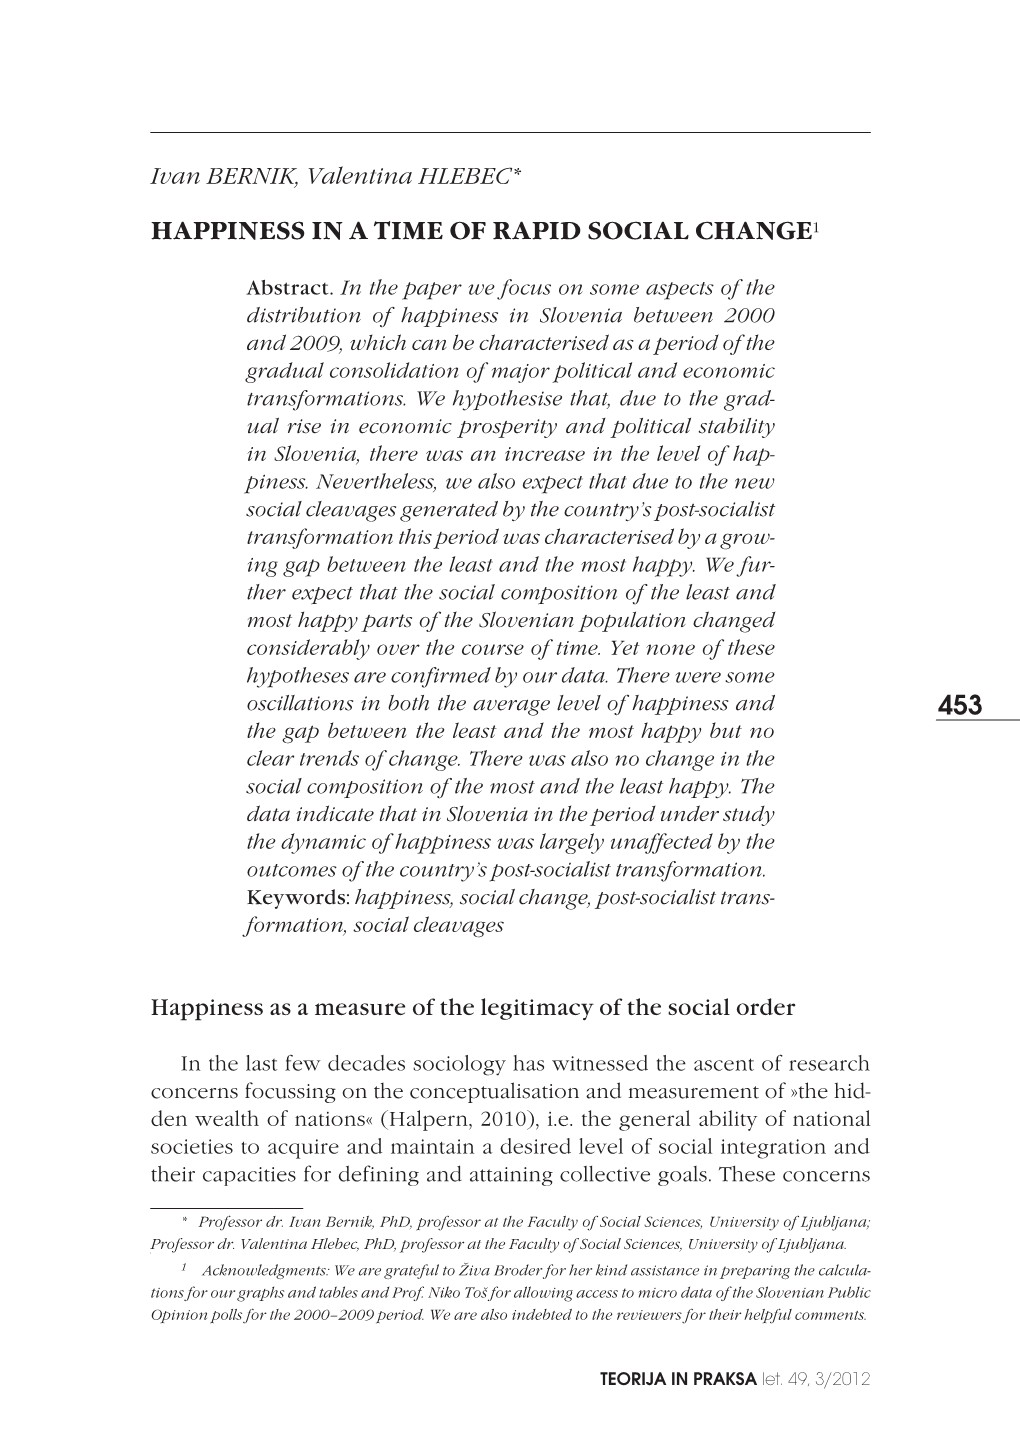 Happiness in a Time of Rapid Social Change1